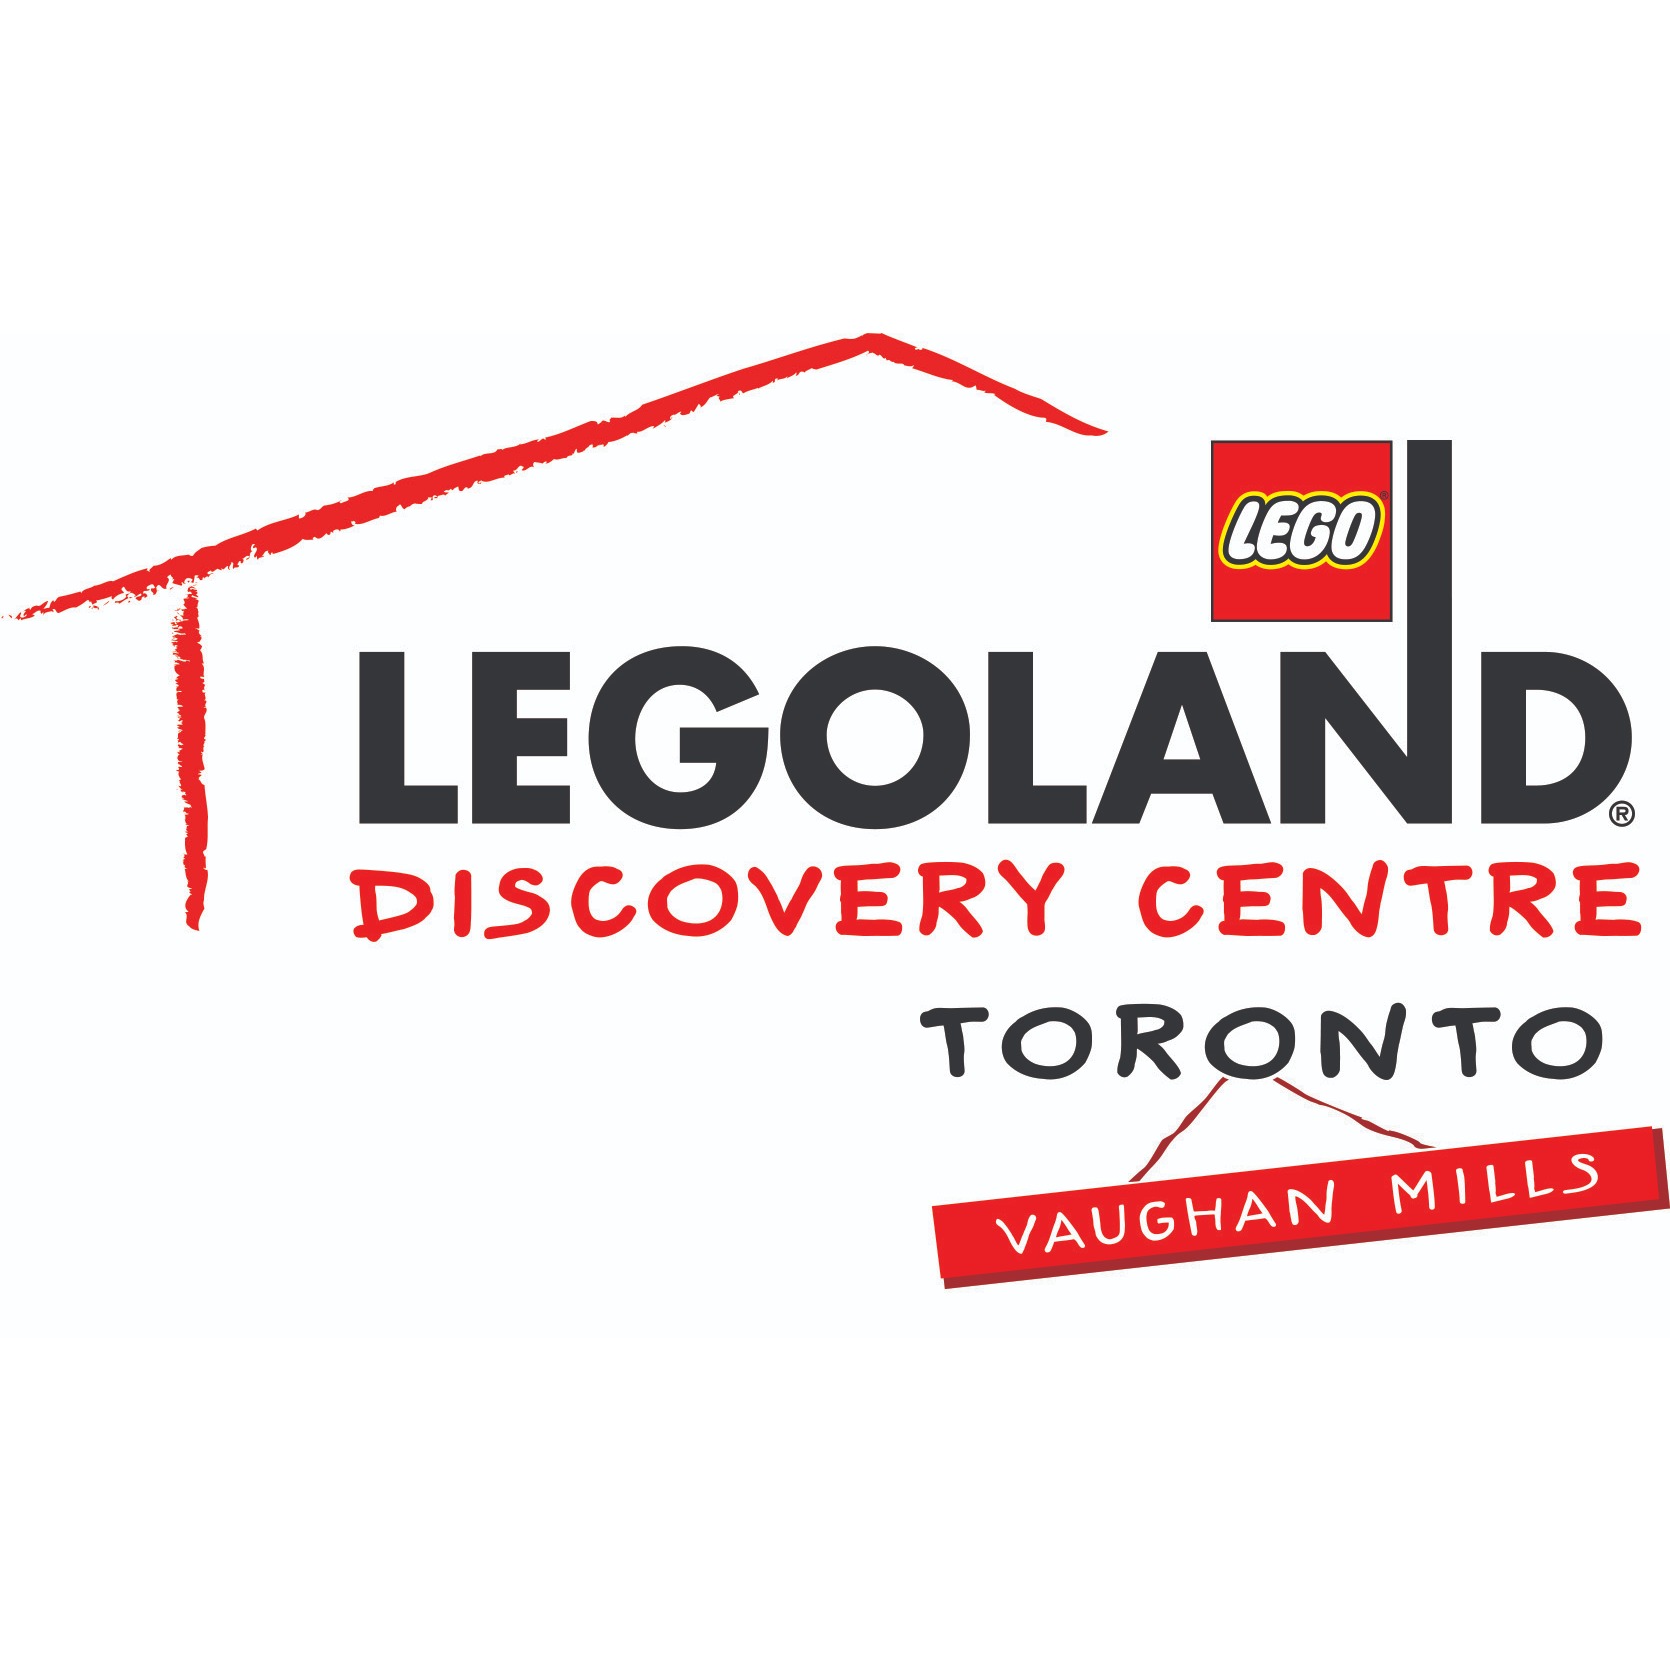 LEGOLAND Discovery Centre Toronto in Vaughan: The Ultimate Indoor LEGO® Playground